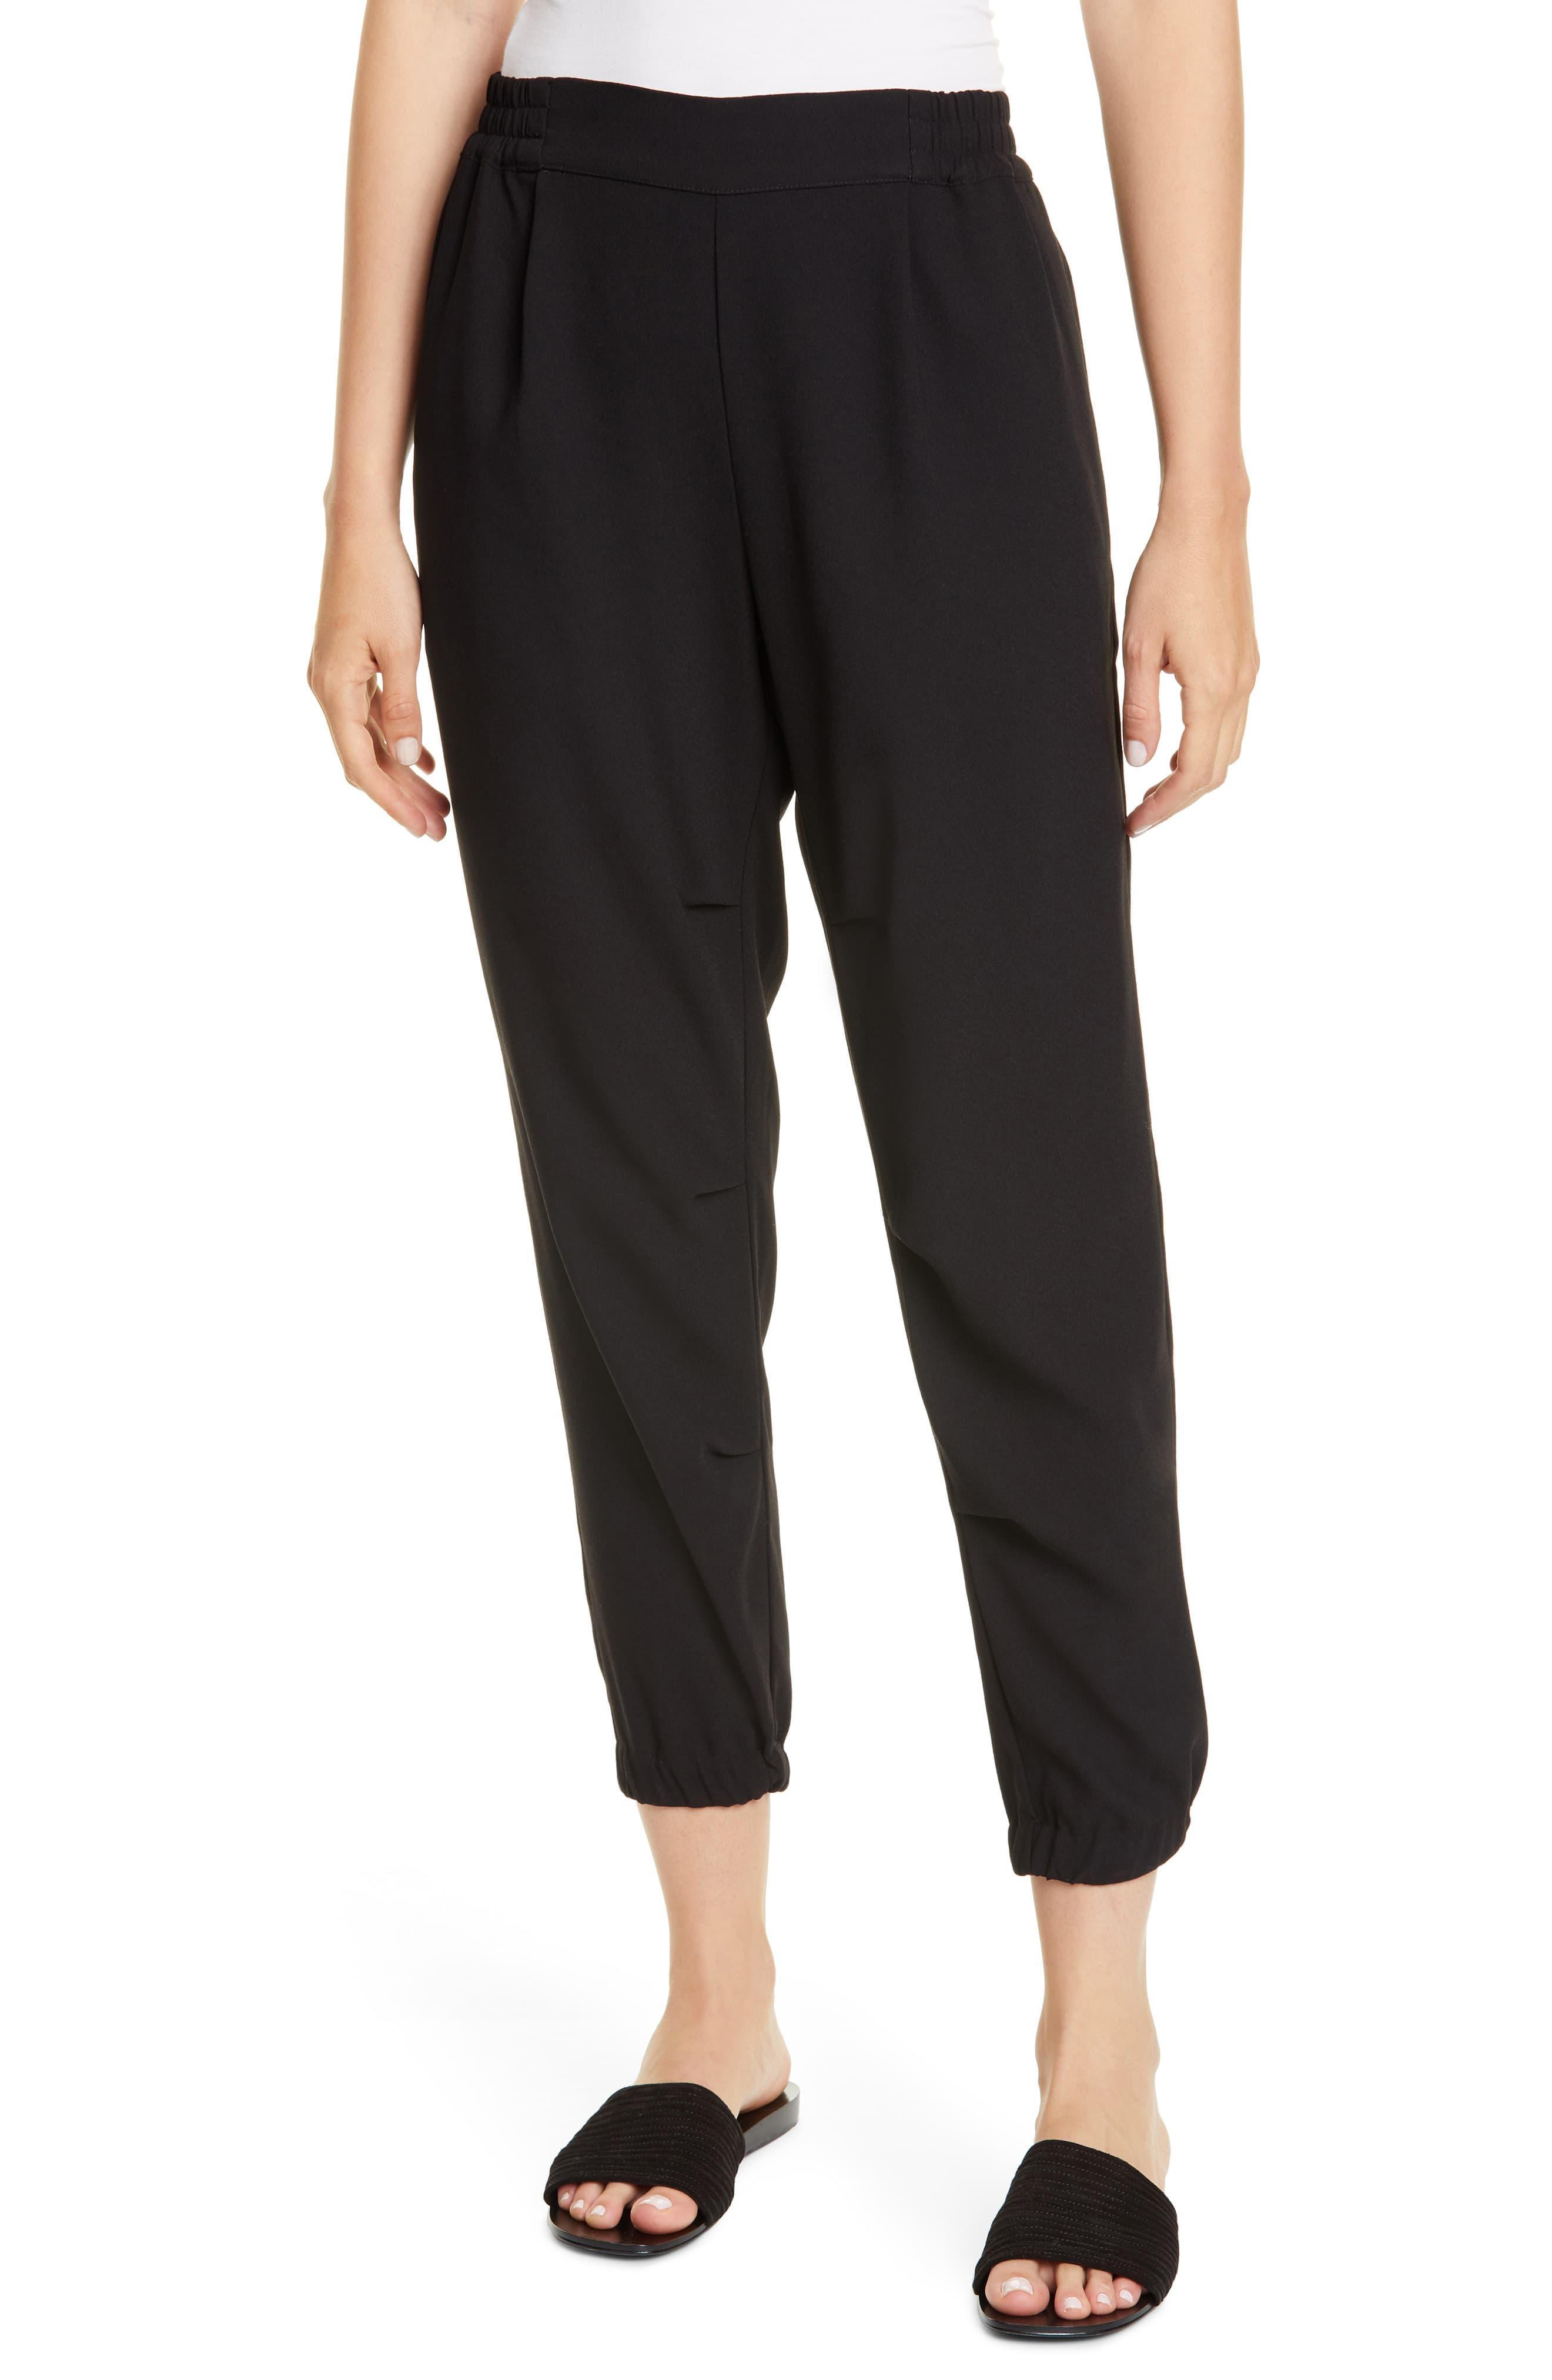 Joie Hedia Woven Crop Jogger Pants in Black - Lyst